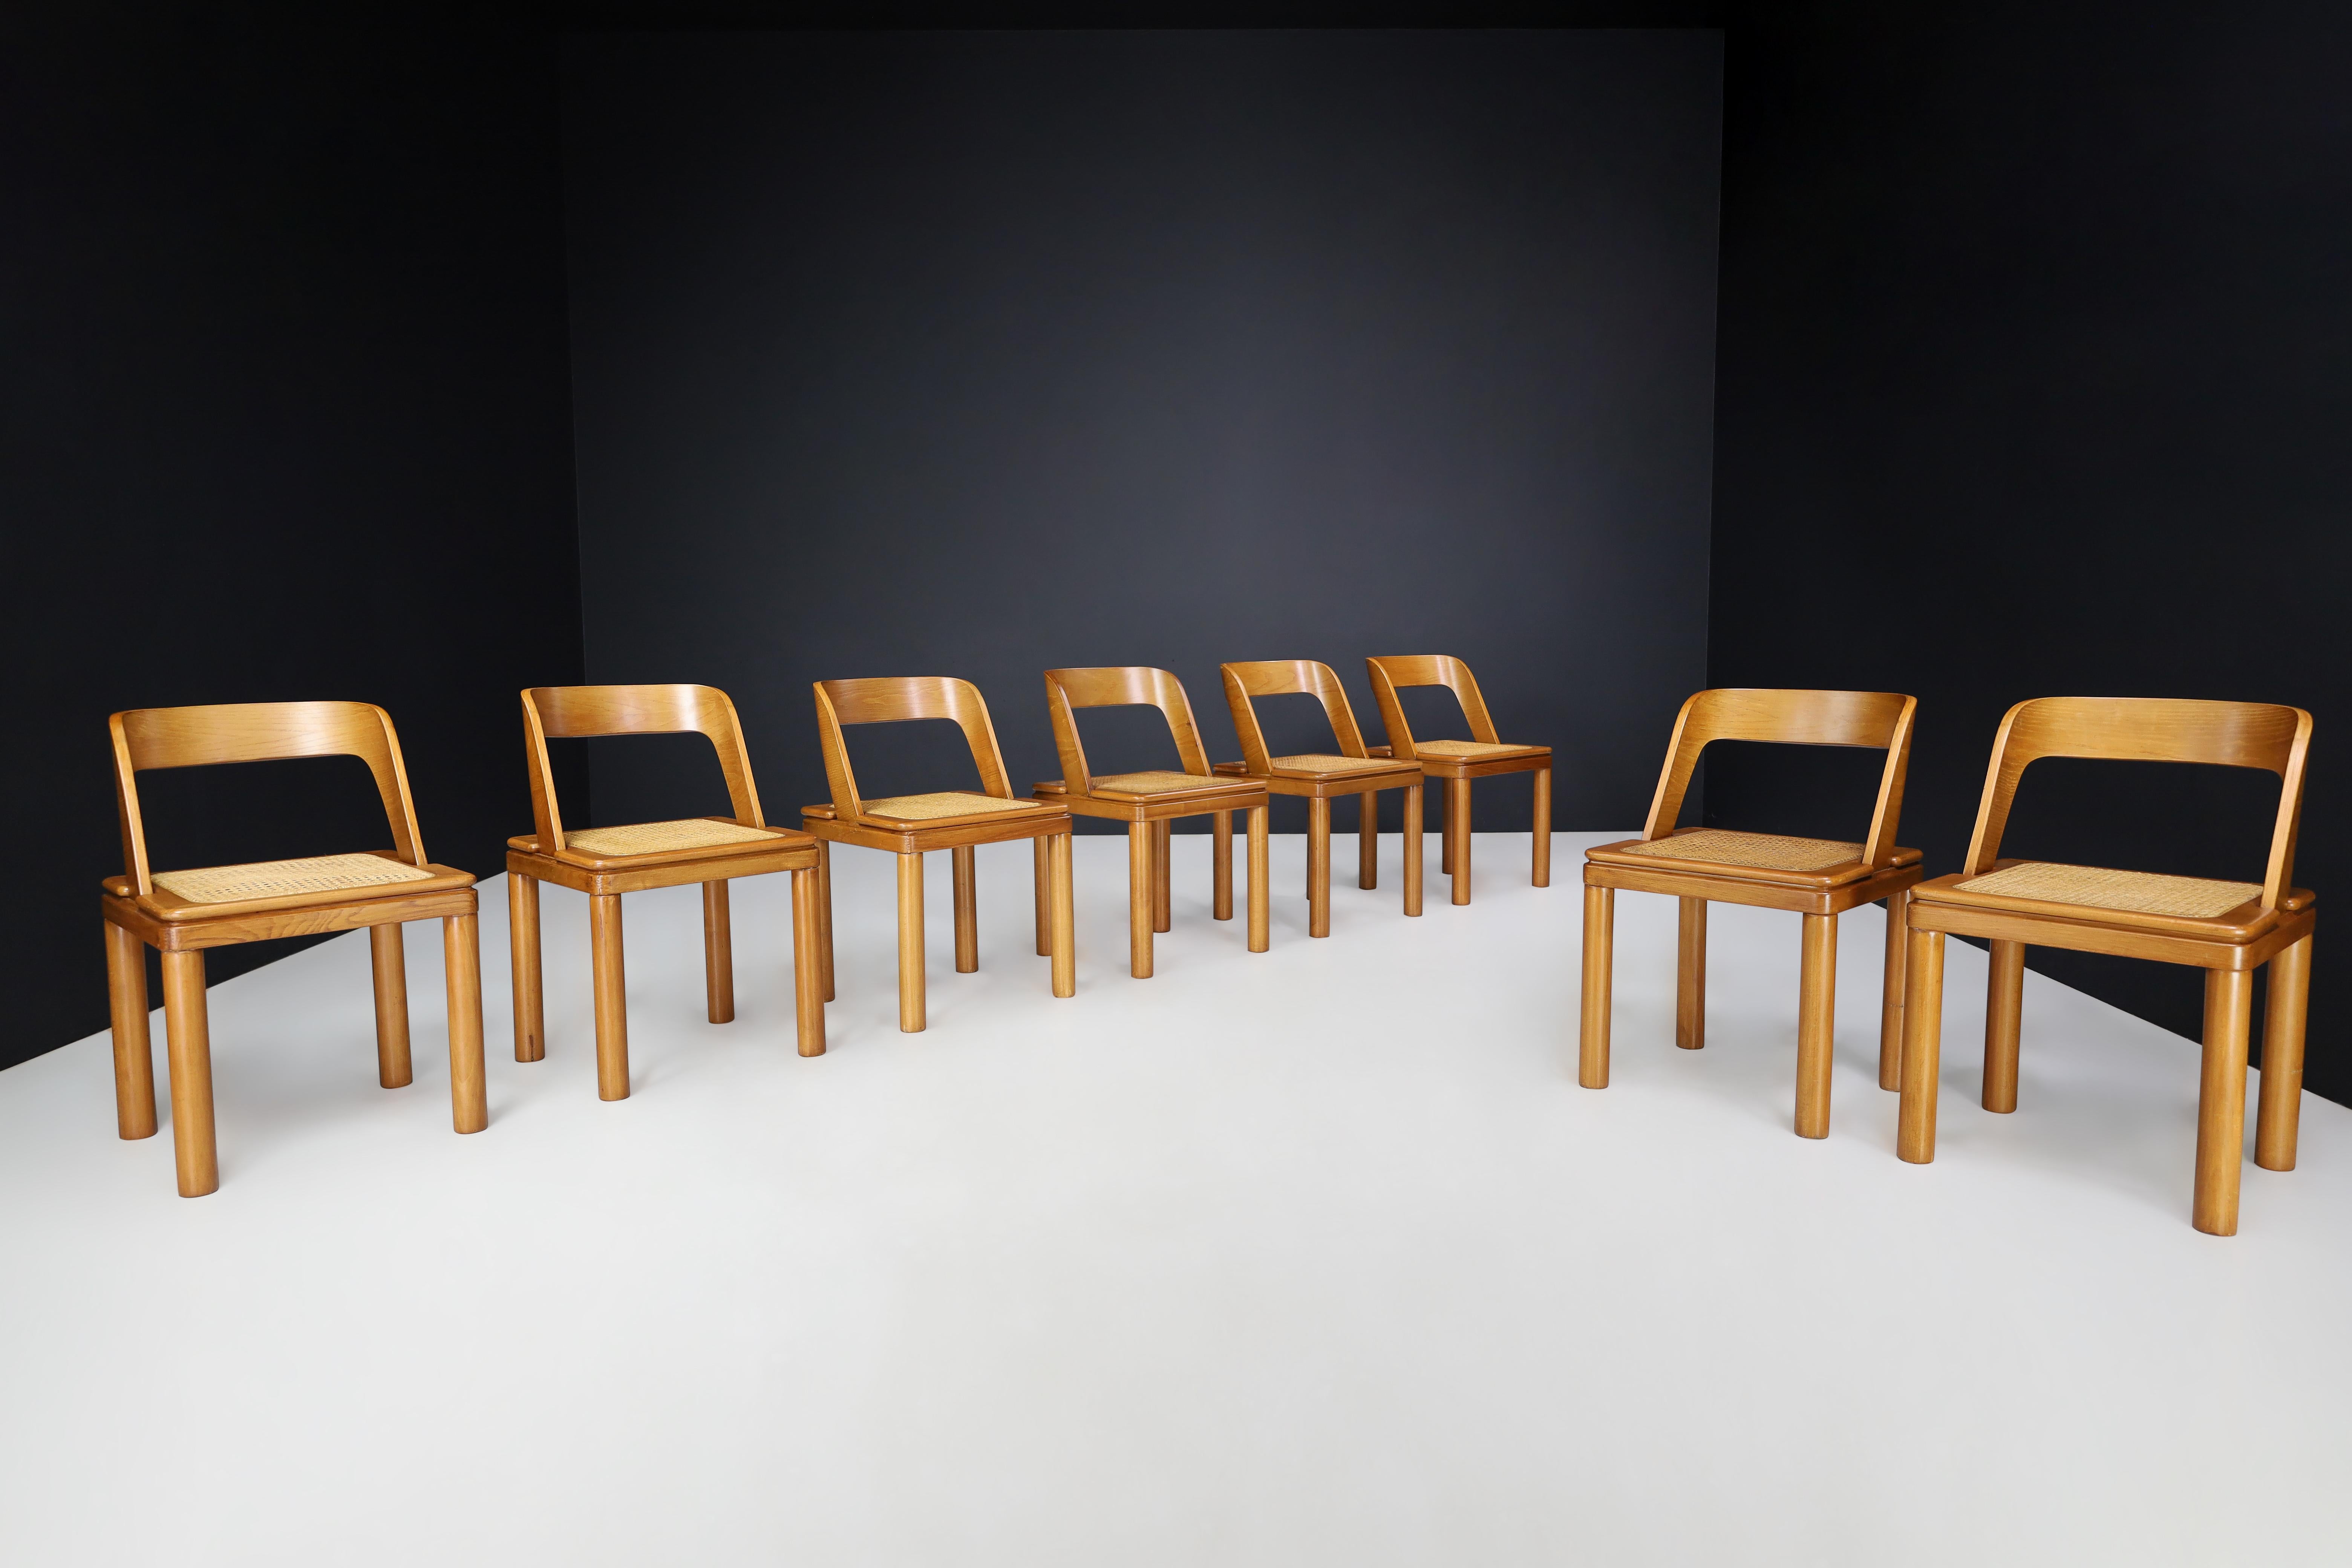 RB Rossana Set of Eight Dining Chairs in Cane and Ash, Italy 1960s

These RB Rossana dining chairs, a set of eight, were made in Italy in the 1960s. The chairs have a sleek, modern design with an open structure. The backrest is a curved frame